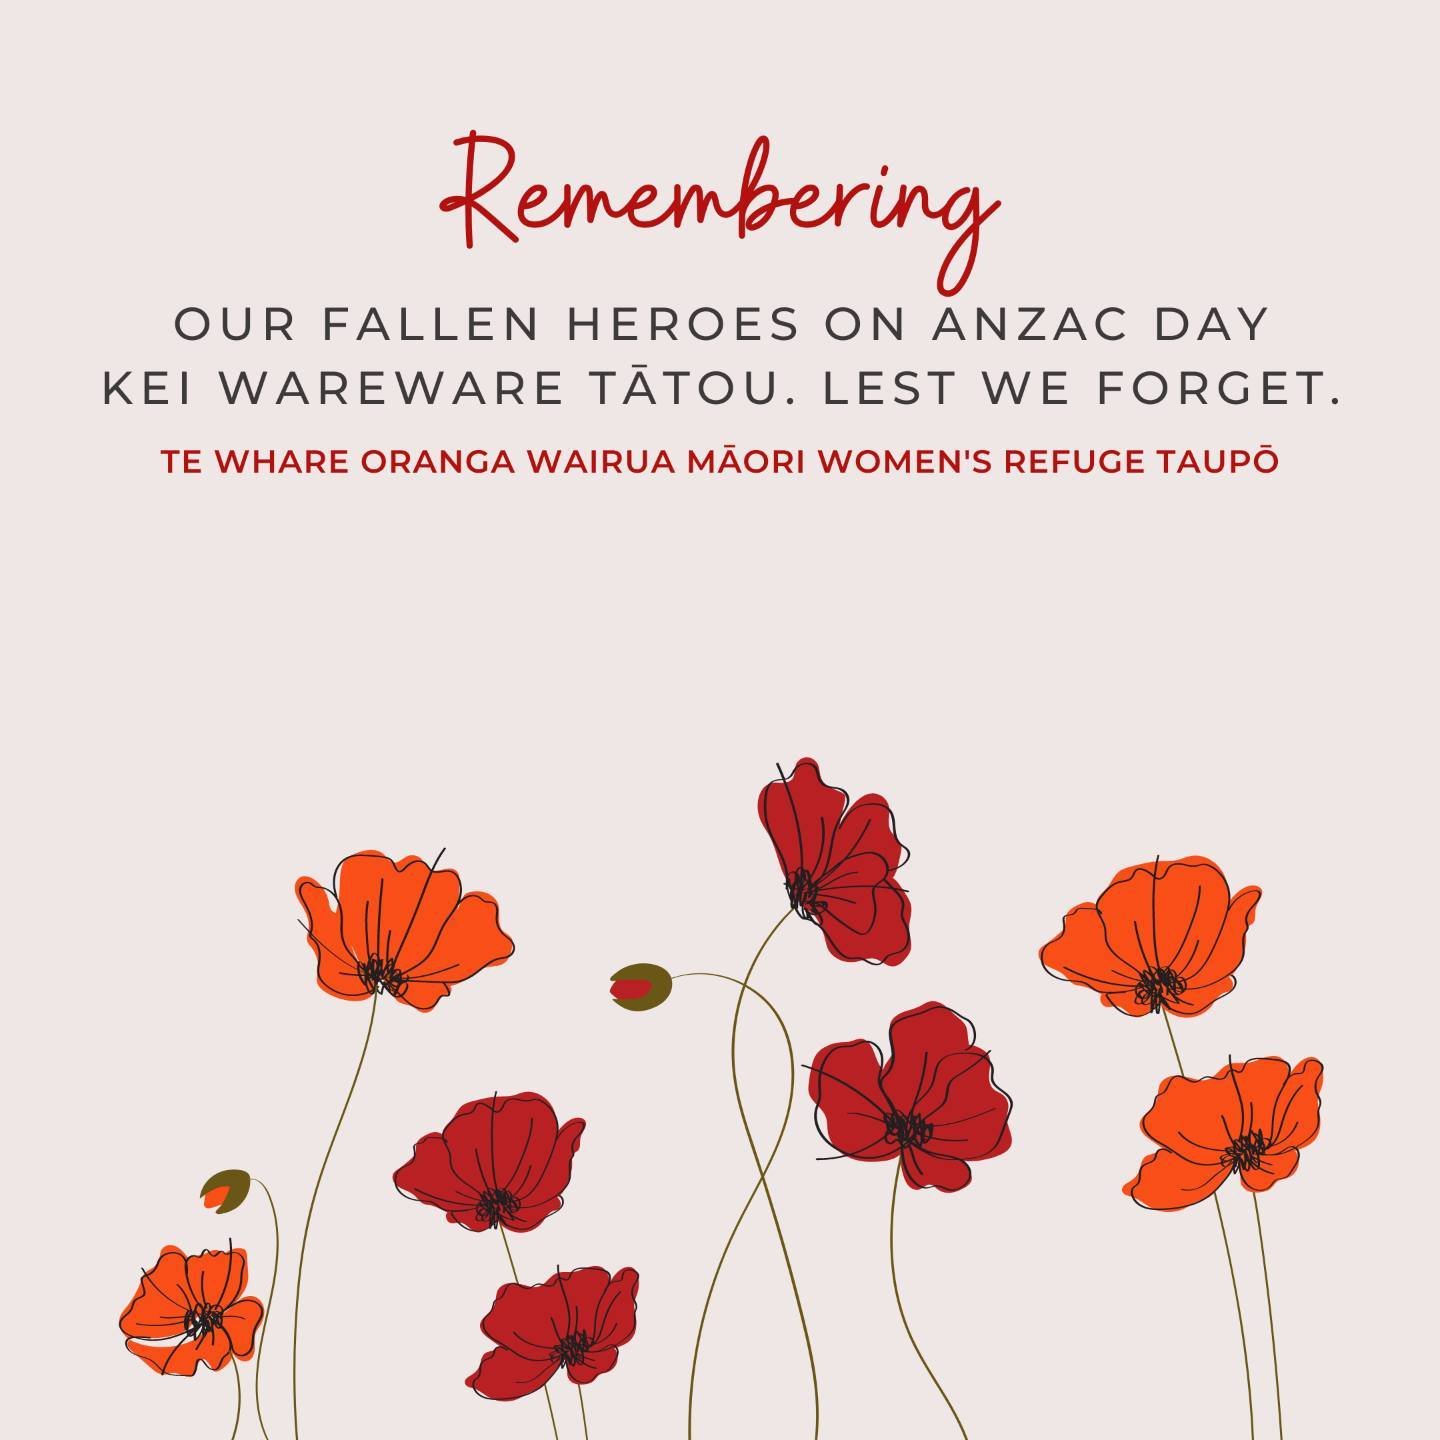 On this Anzac Day, let us express our respect to all the selfless people who put our lives ahead of theirs. Kei Wareware Tātou. Lest We Forget.

www.twowrefuge.org.nz